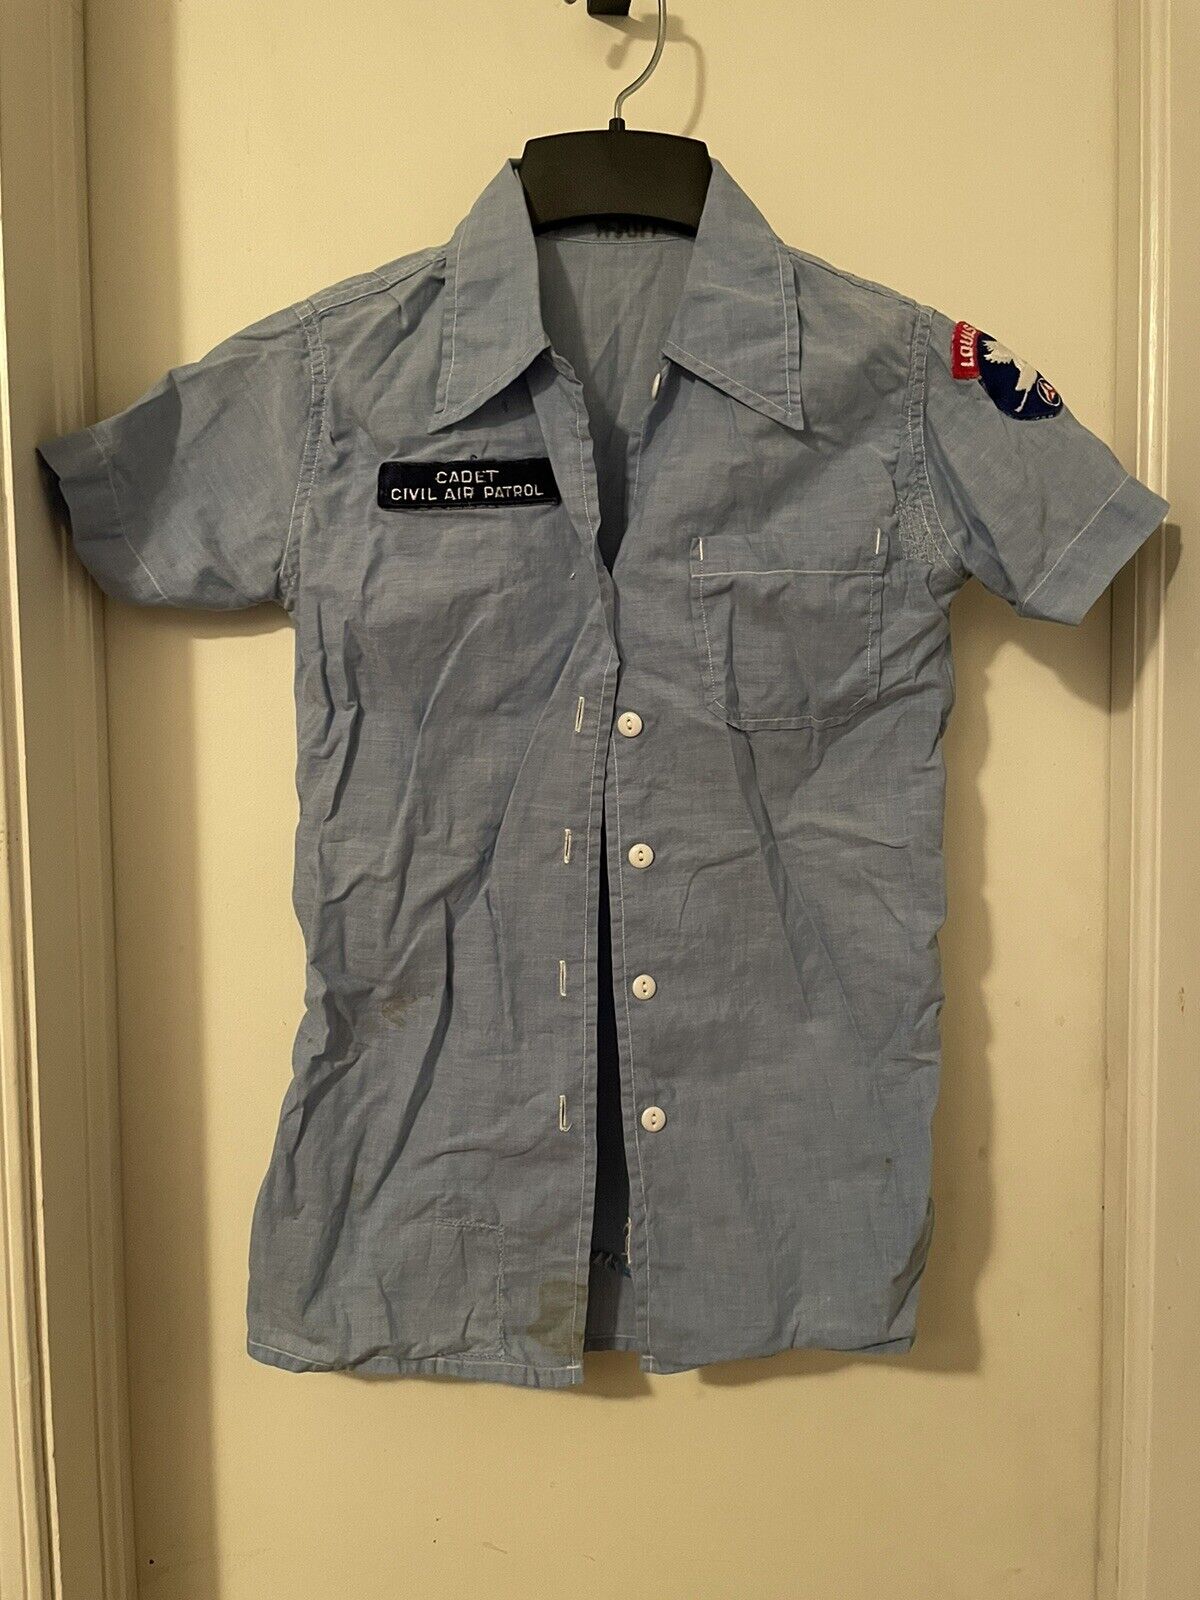 Vintage Civil Air Patrol Chambray Utility Shirt, LAWG Wing Patch